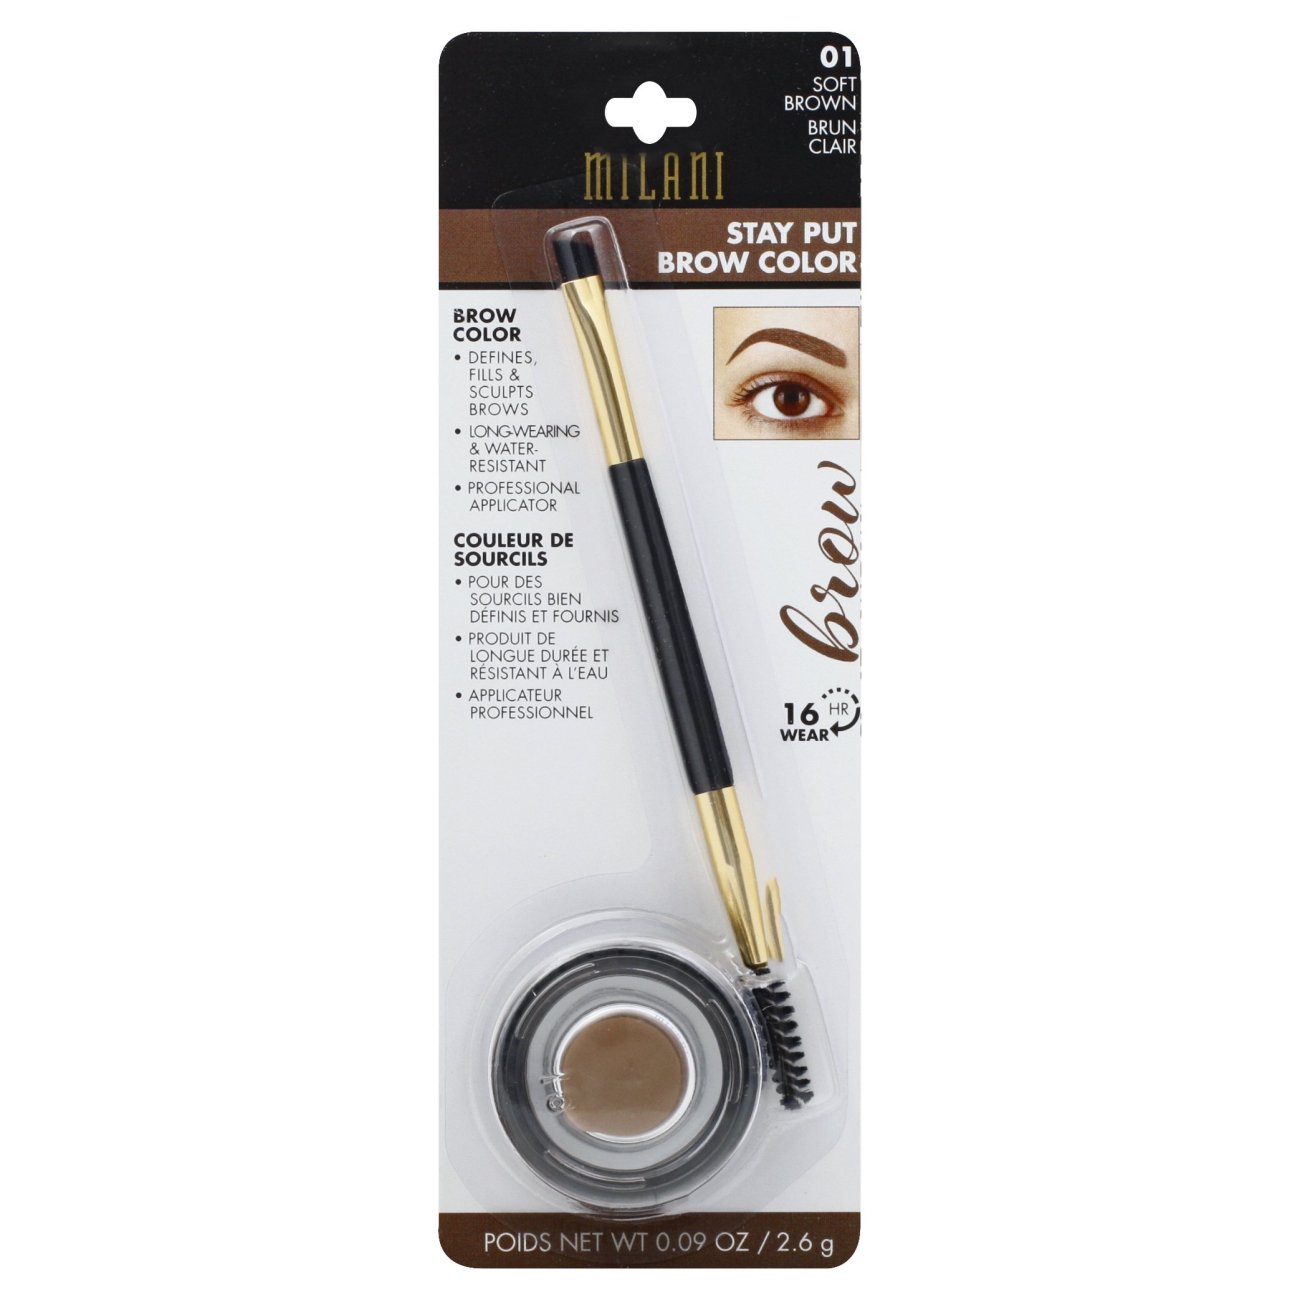 Milani Stay Put Brow Color Soft Brown - Shop Eyes at H-E-B